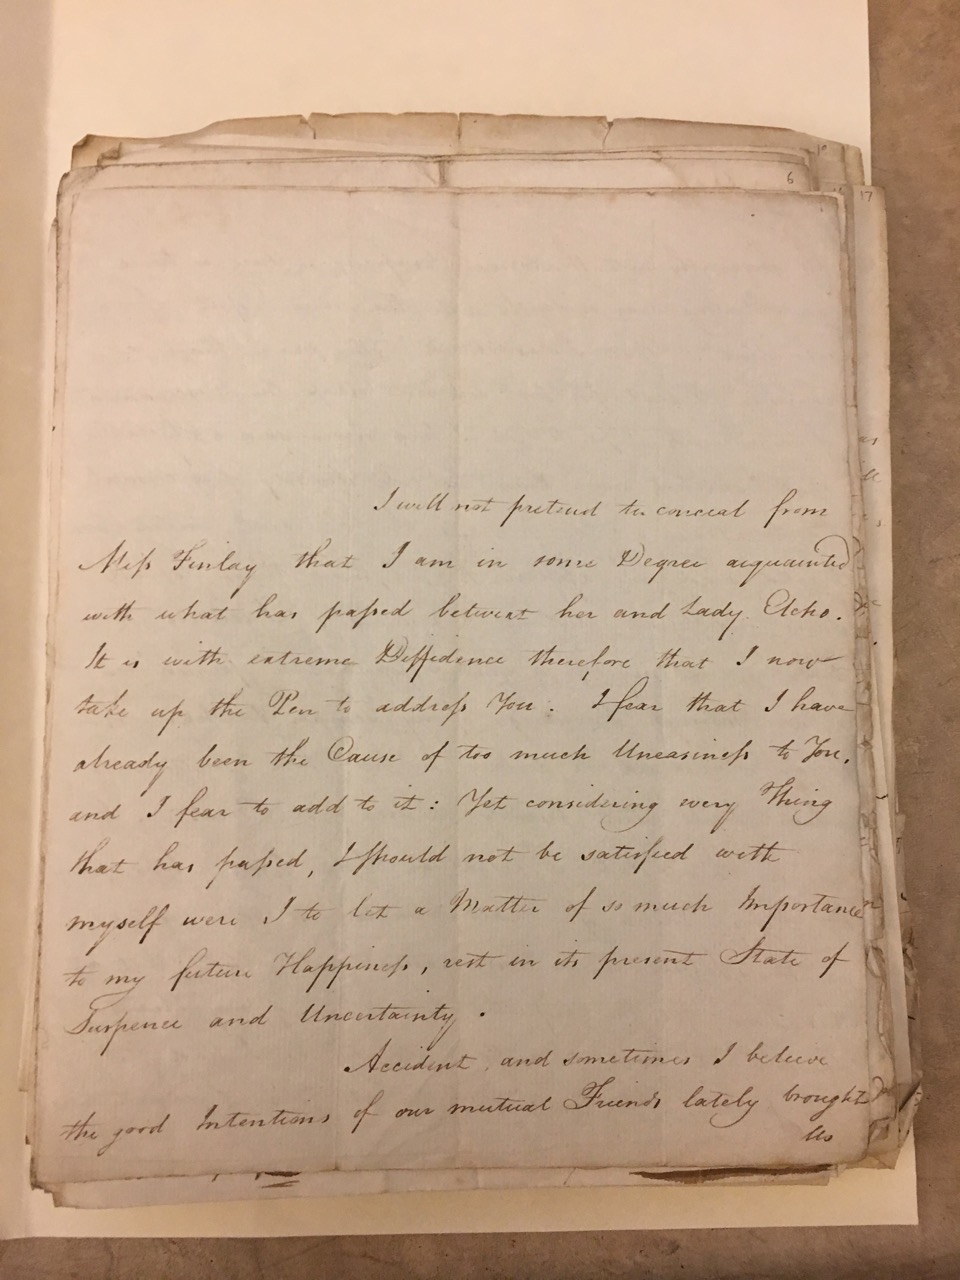 Image #1 of letter: David Anderson to Christina Findley (Anderson), 14 December 1787